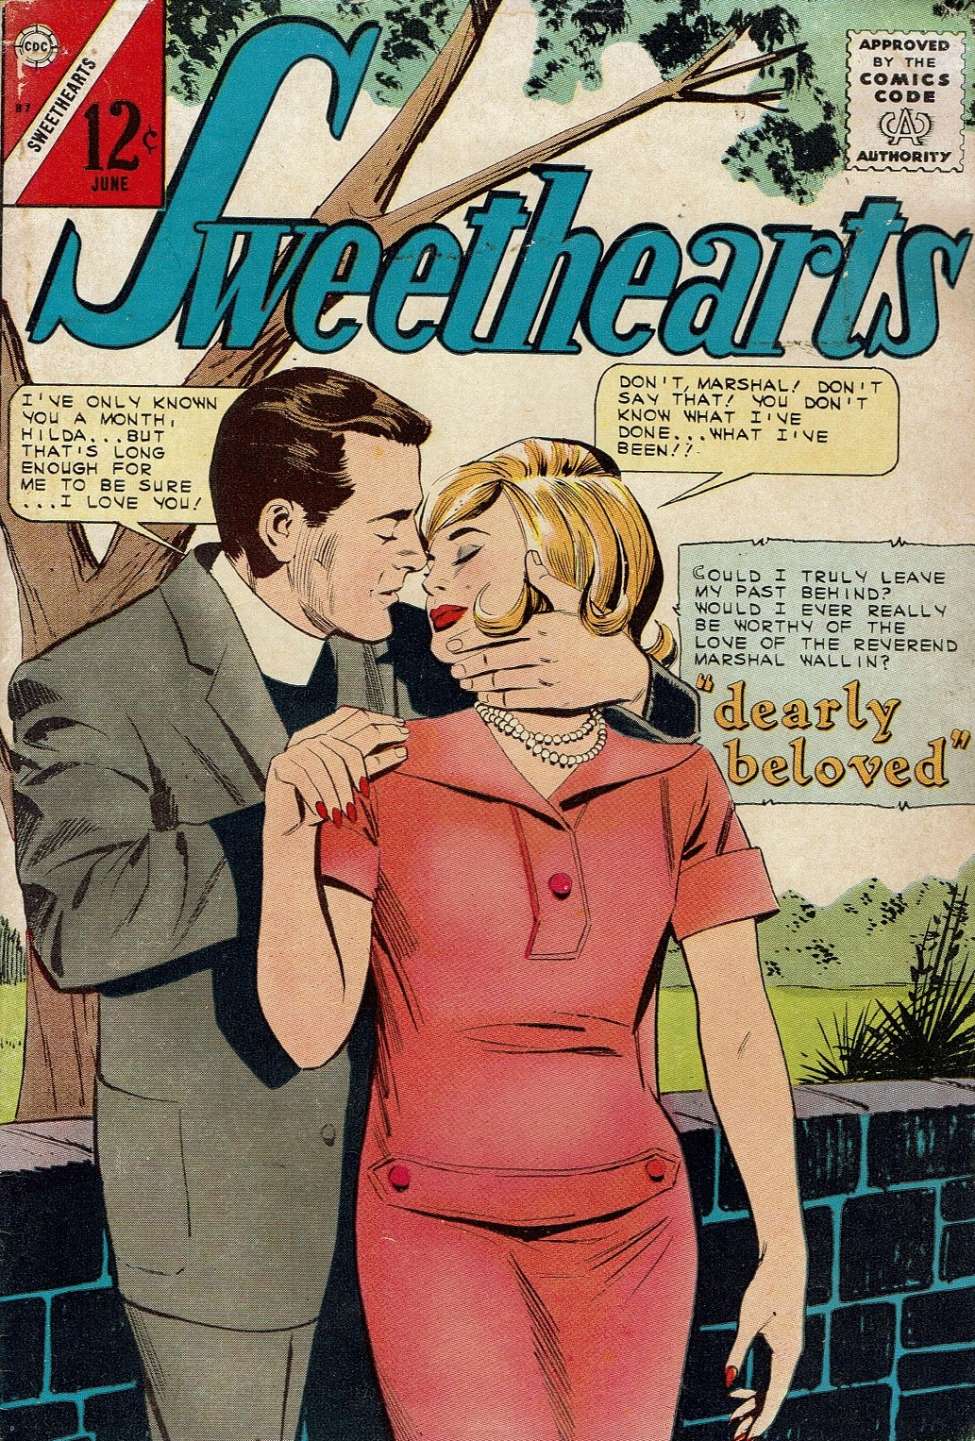 Book Cover For Sweethearts 87